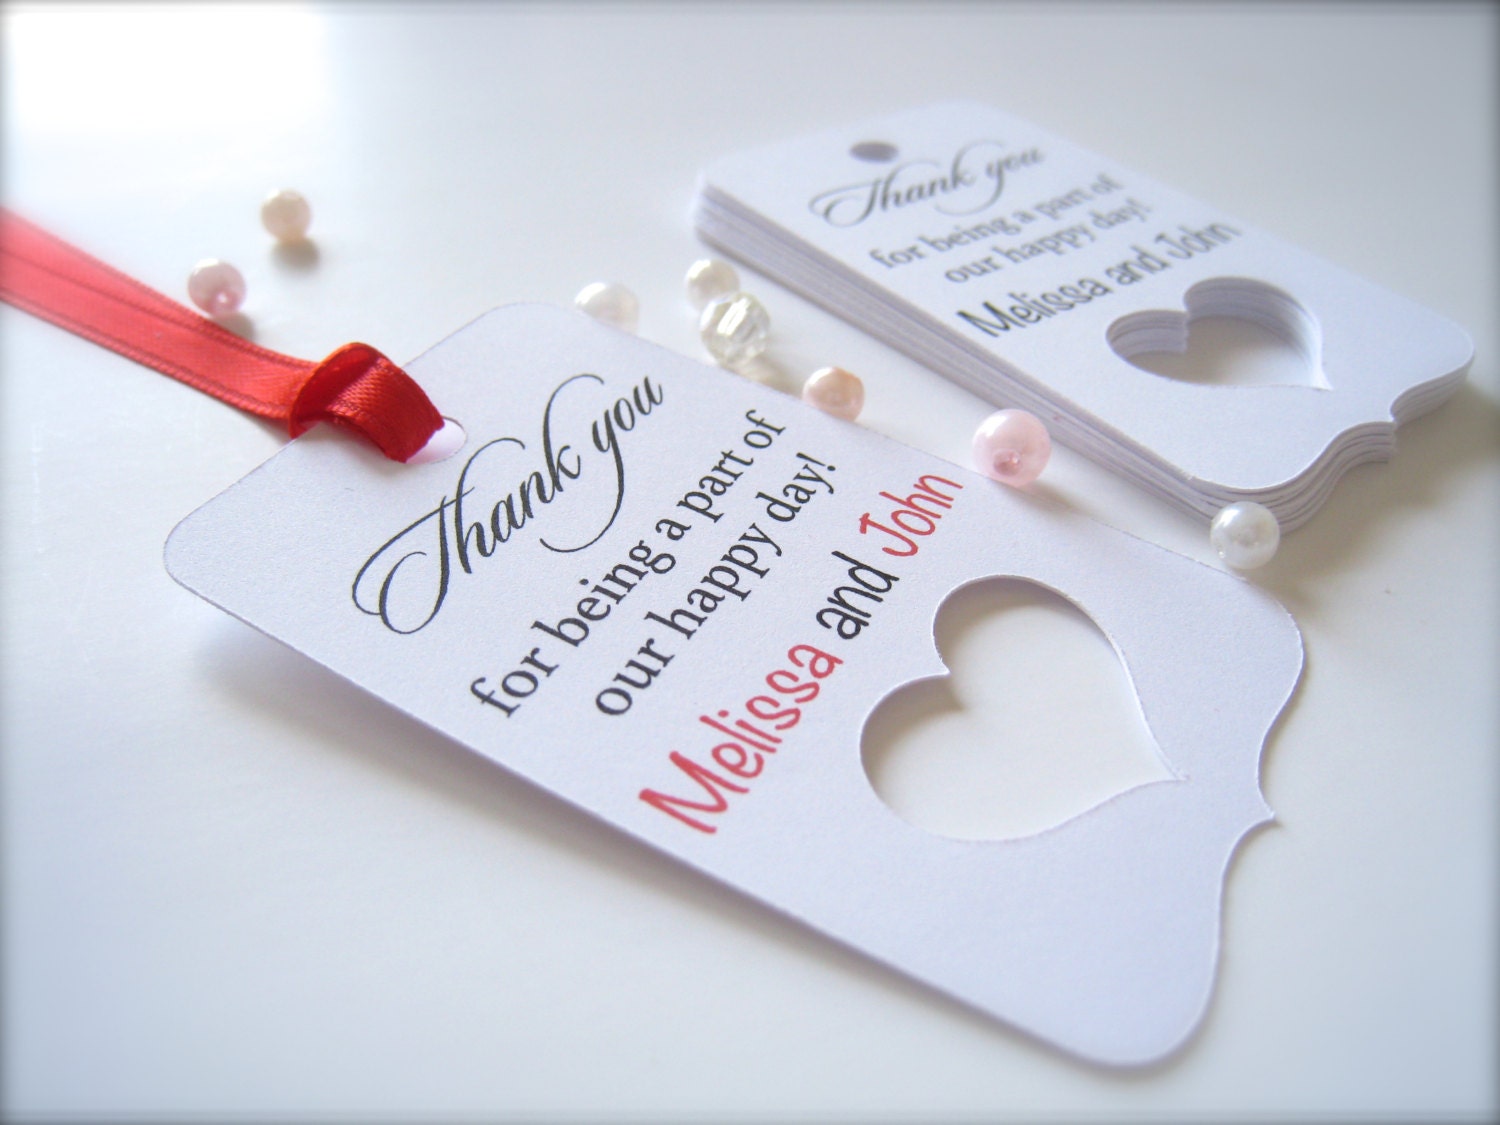 20 Personalized Wedding Favor Tags, die cut tags, Wedding tags, Thank You tags, Favor tags, Gift tags - PaperLovePrints